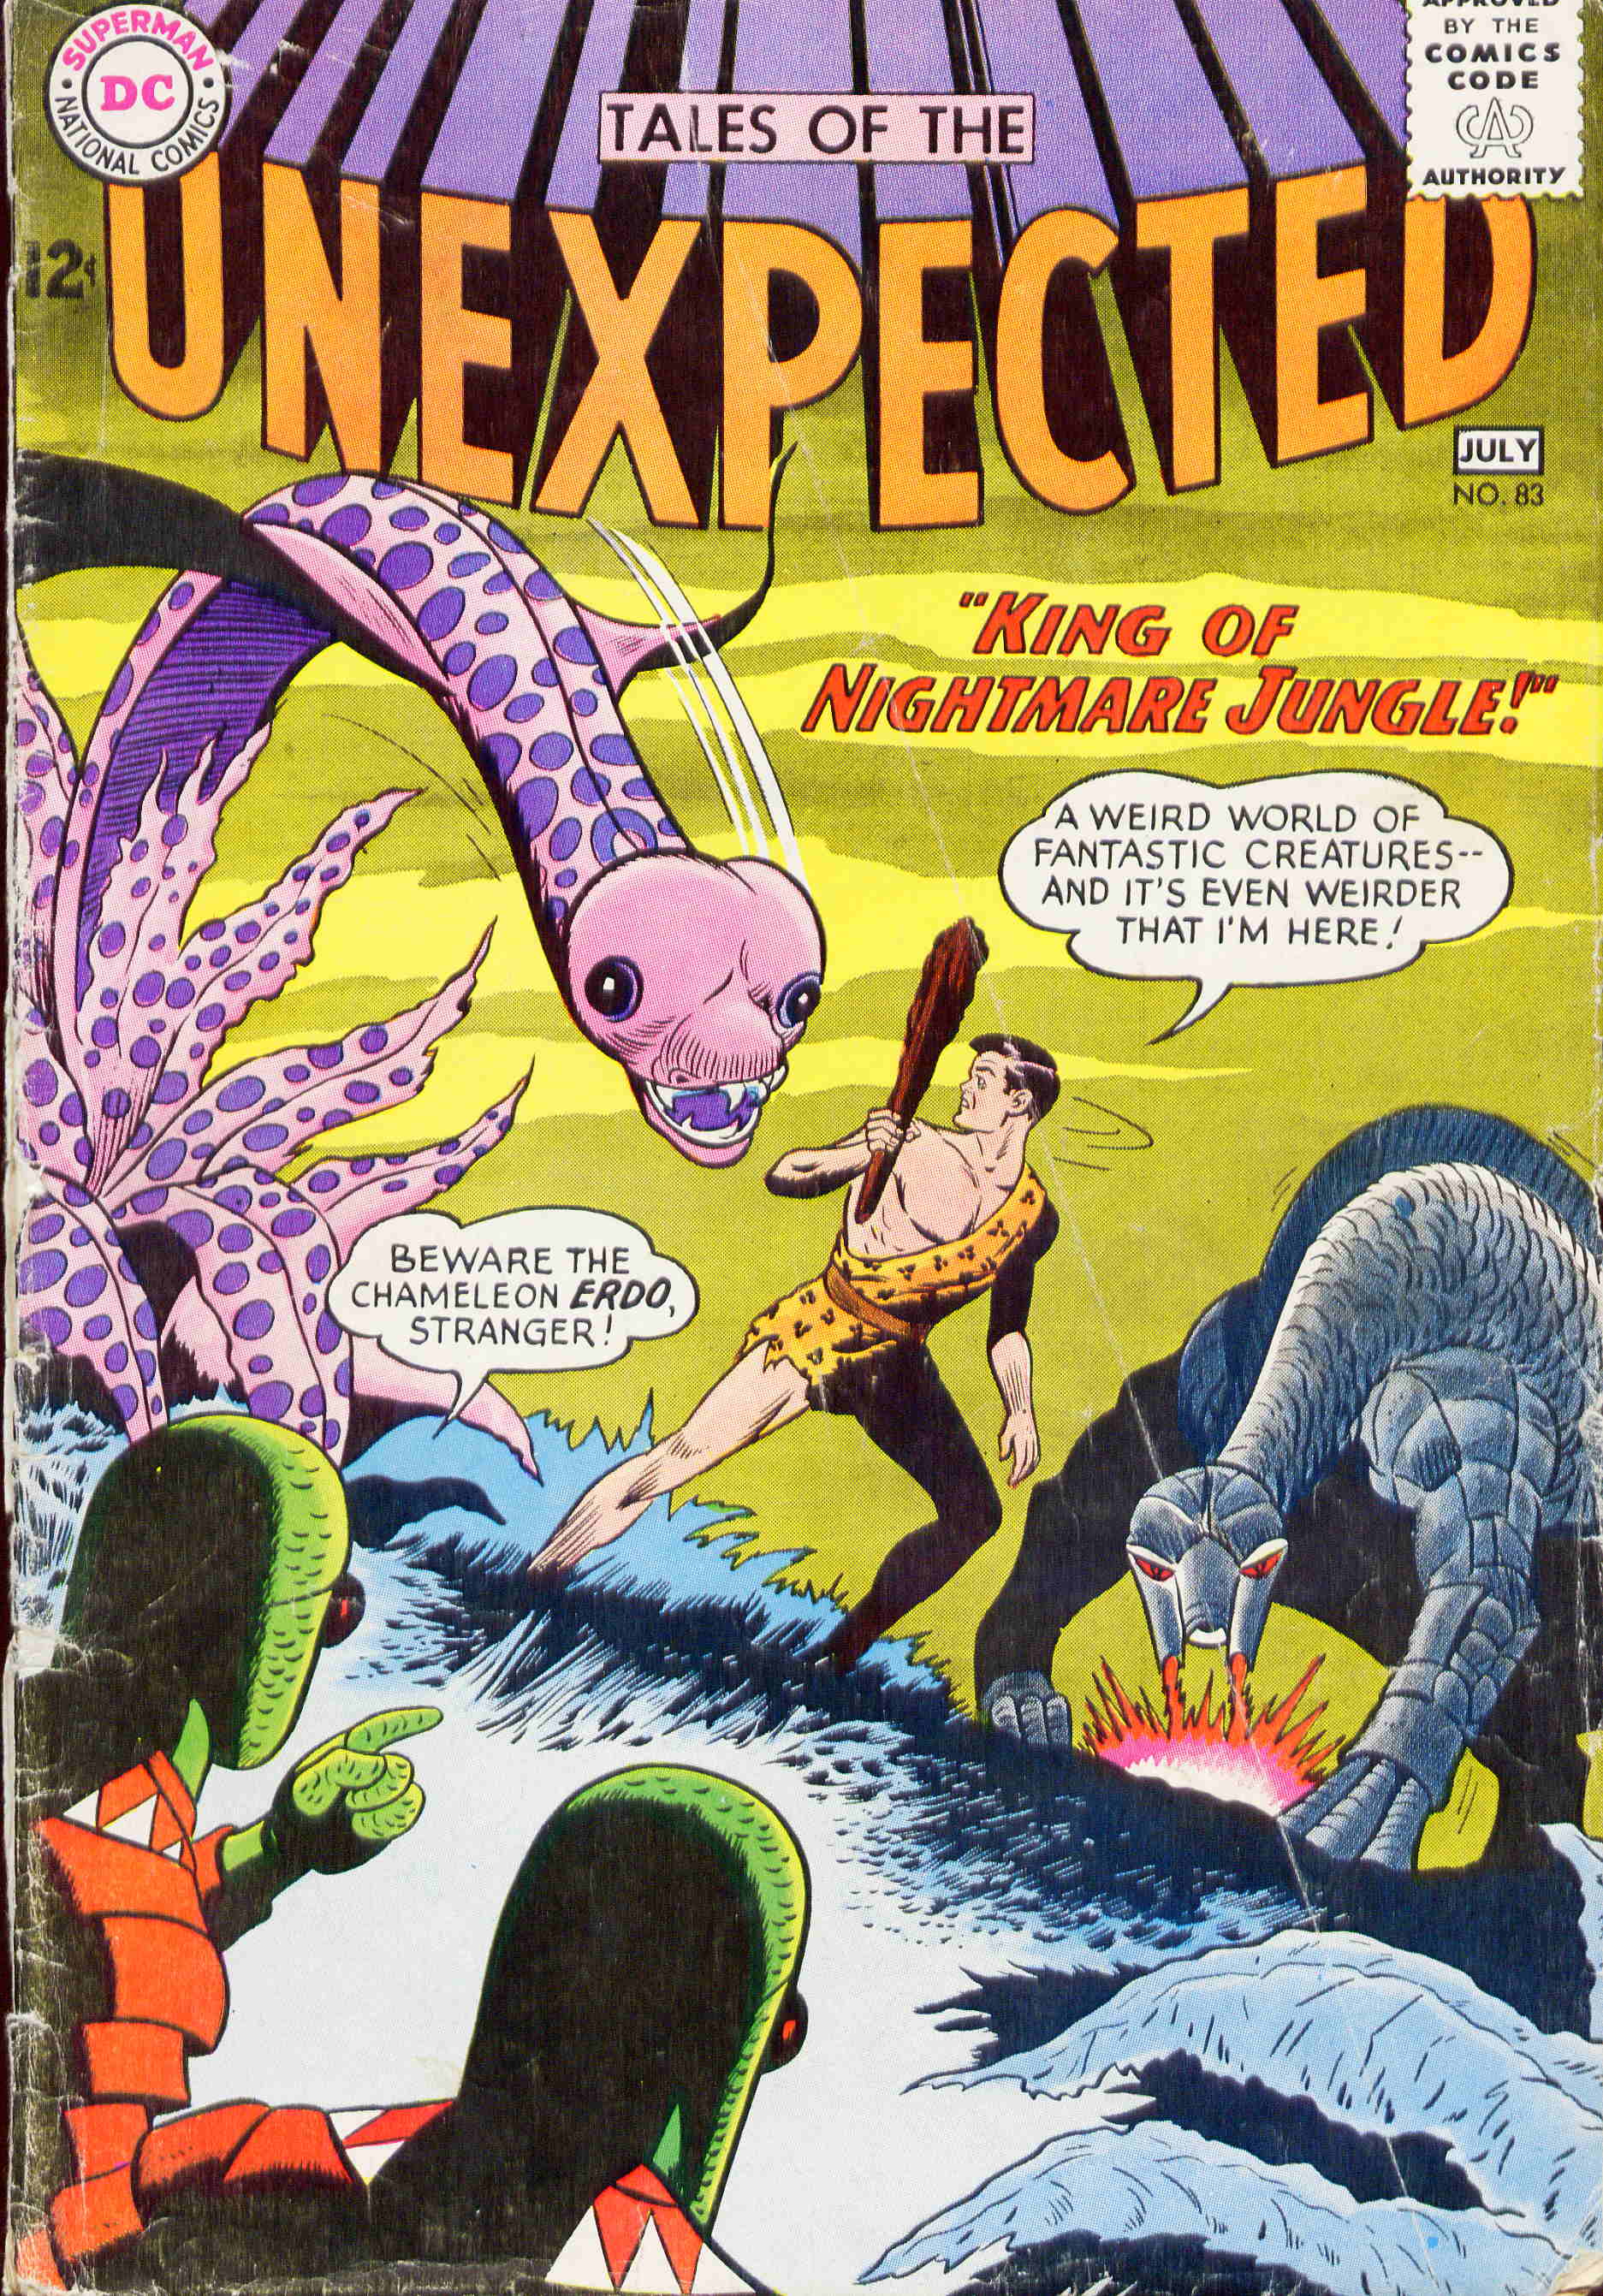 Read online Tales of the Unexpected comic -  Issue #83 - 1